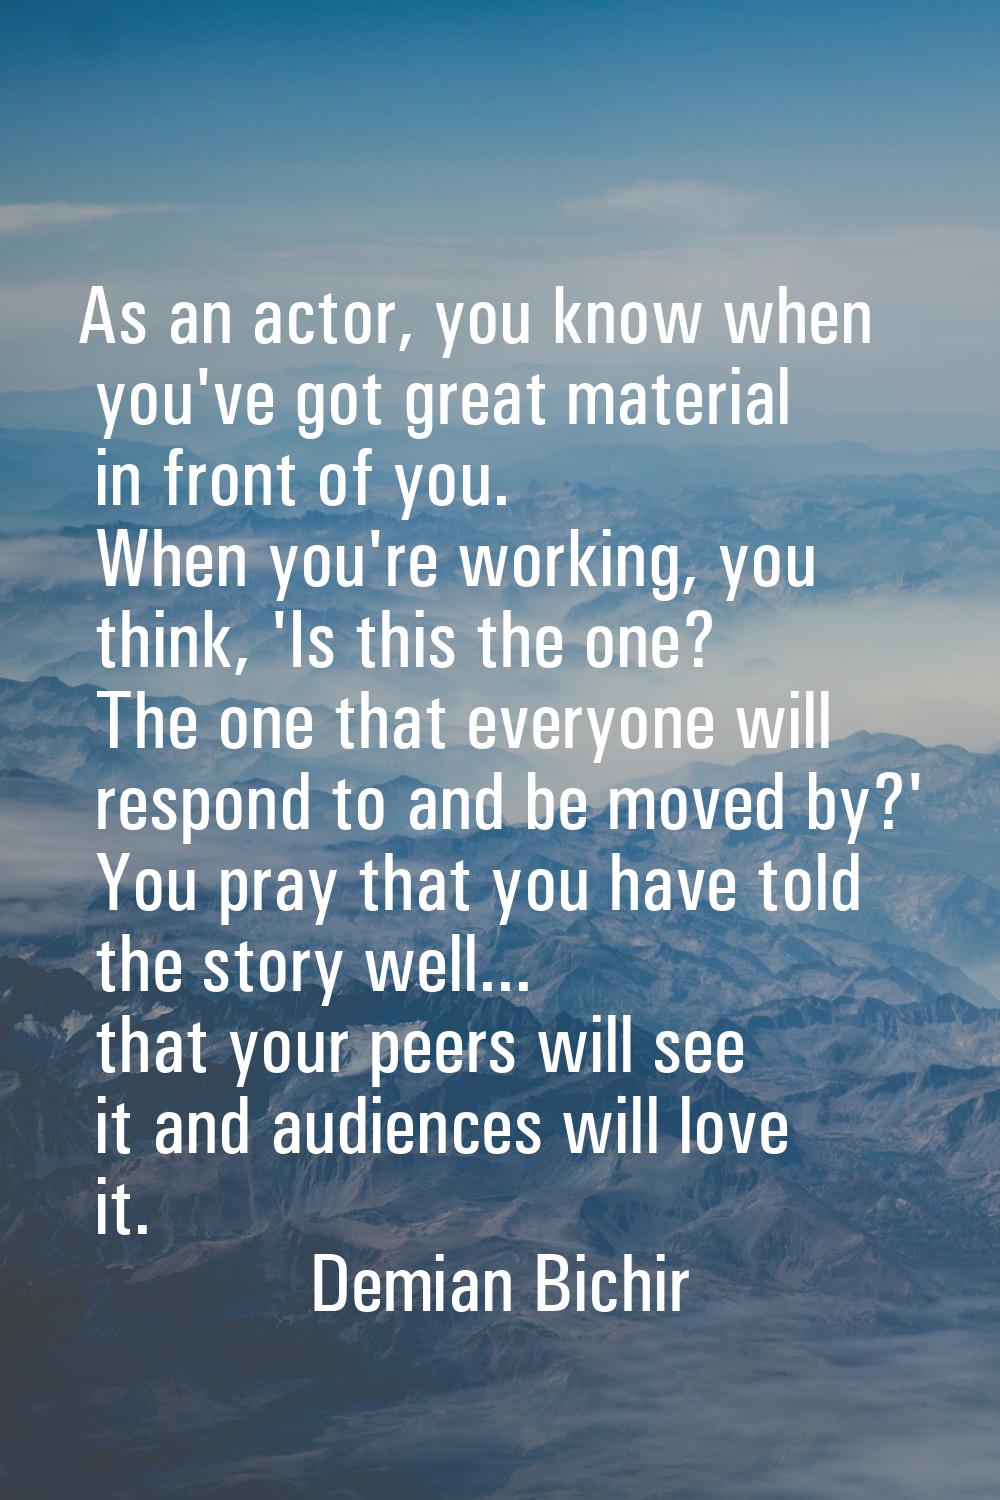 As an actor, you know when you've got great material in front of you. When you're working, you thin